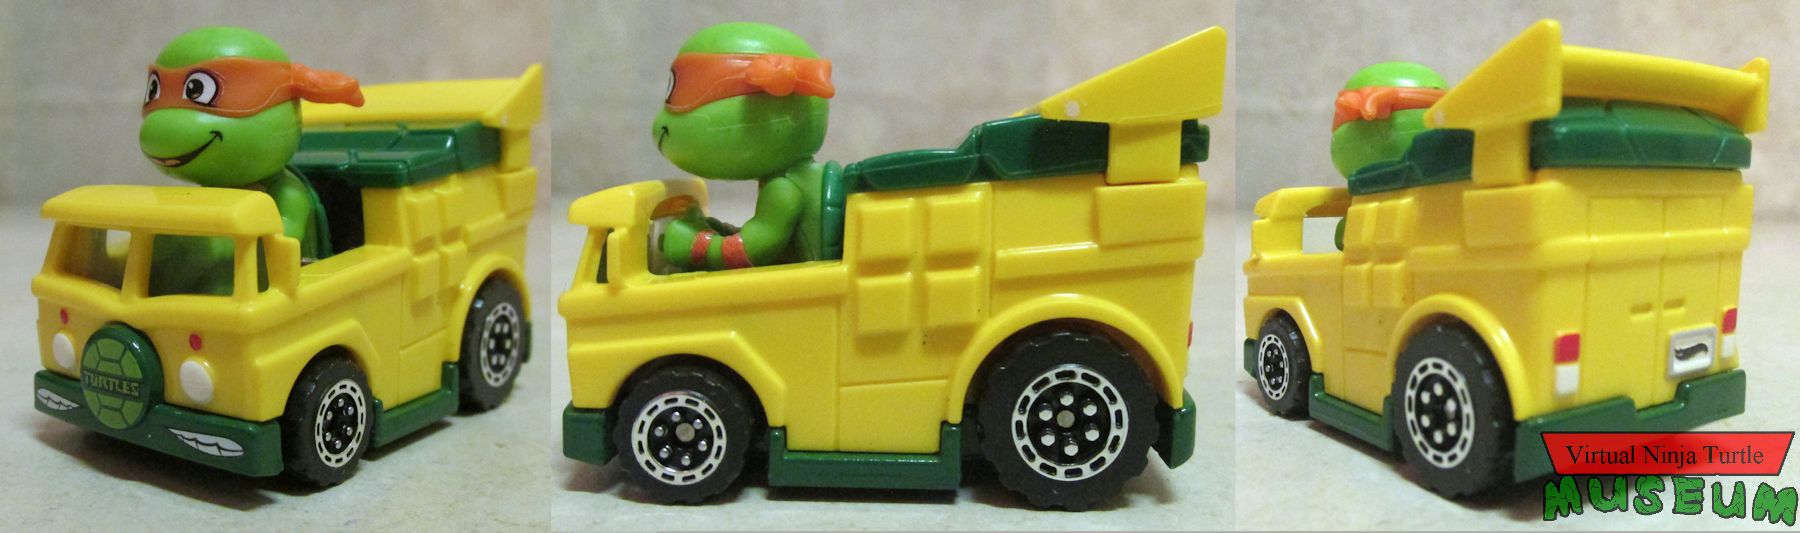 Racer Verse Michelangelo front, side and rear view